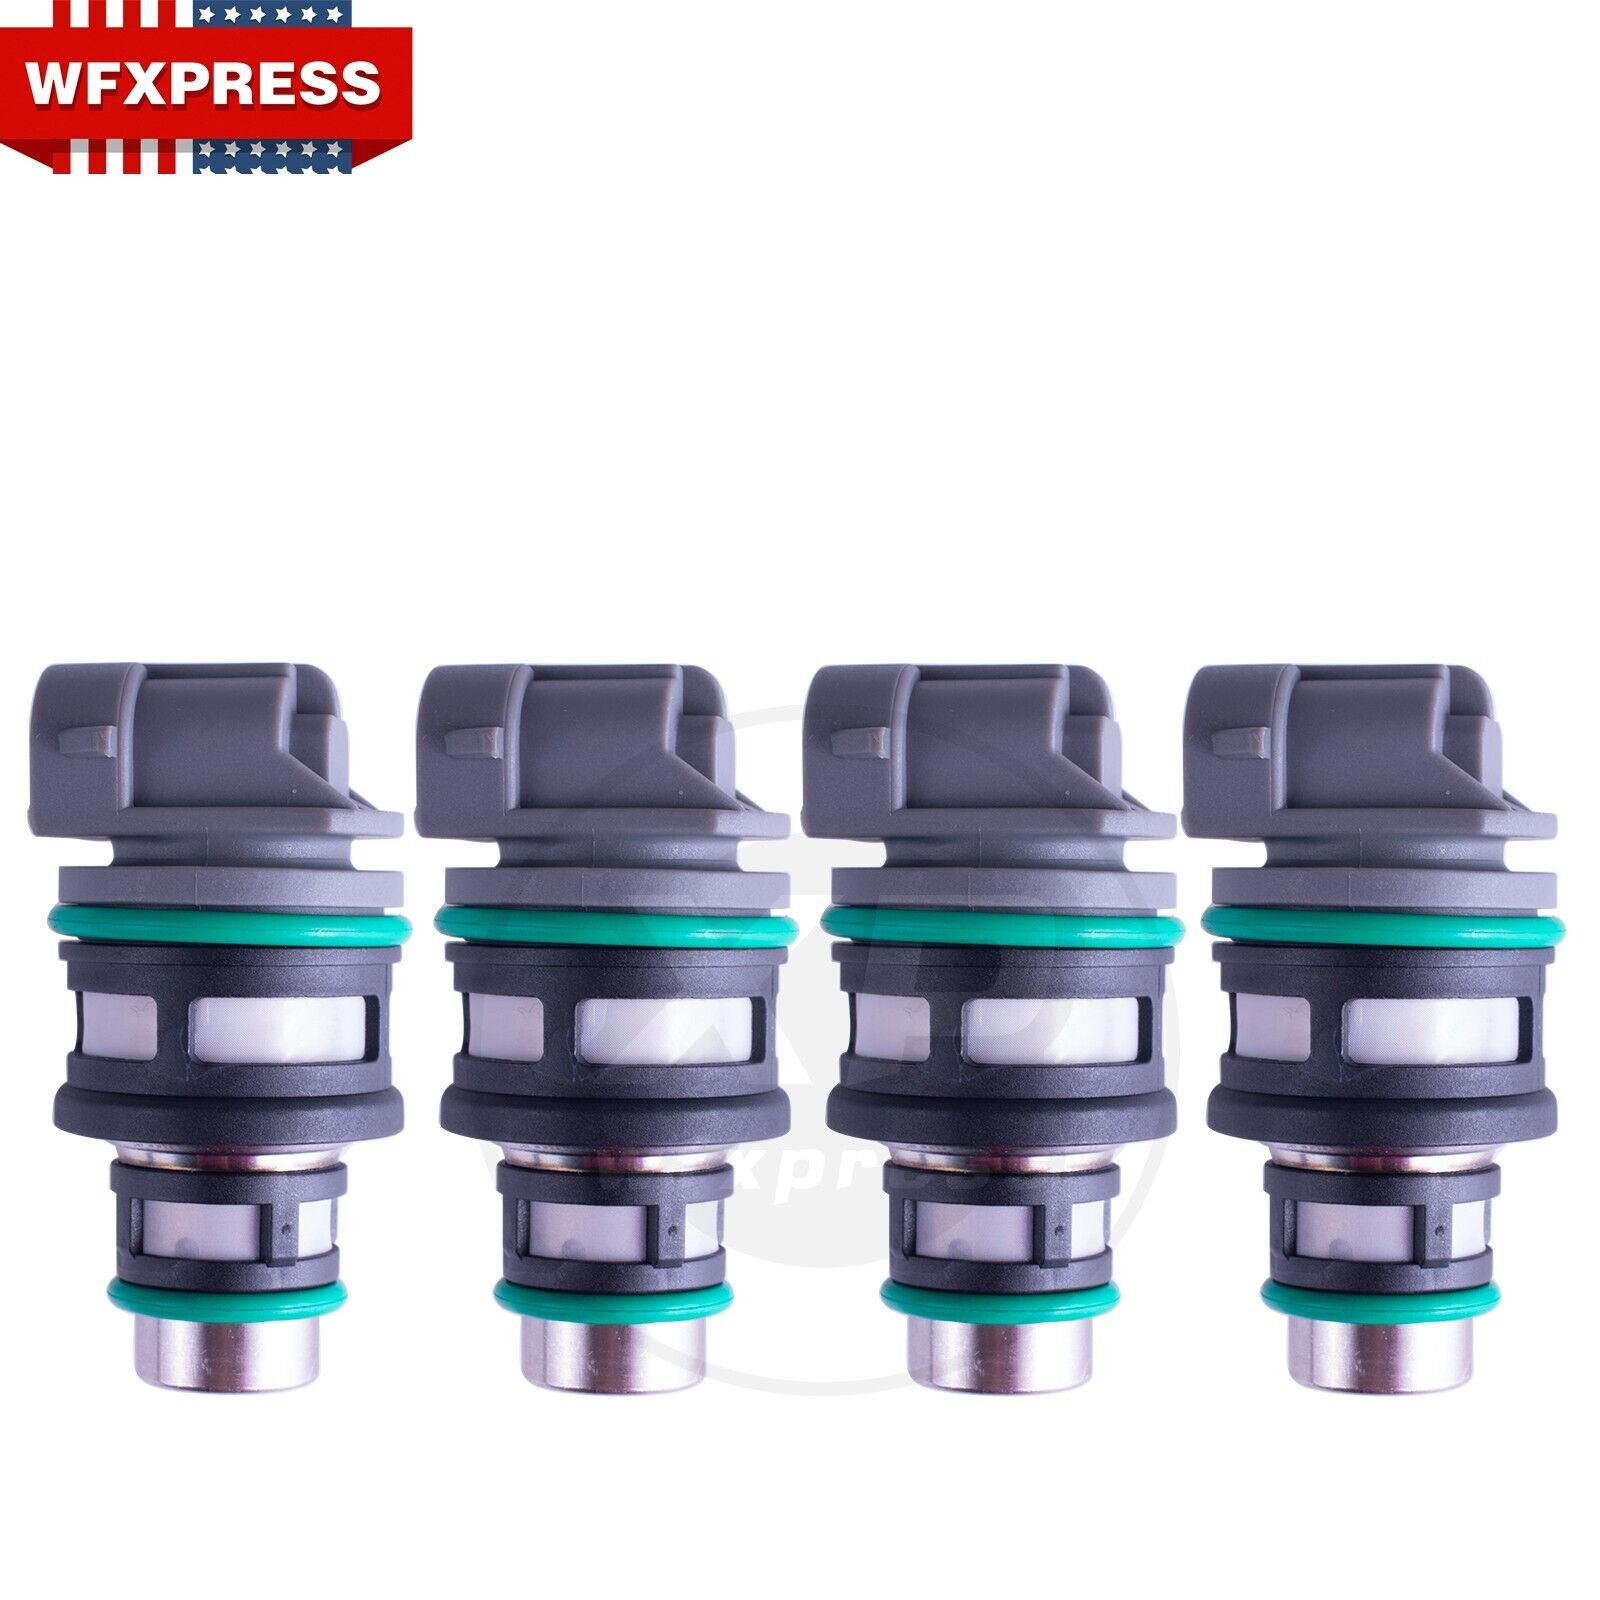 Fuel Injectors  For 1995 1996 1997 Chevy Cavalier S10 LLV 2.2L 17113124/17113197